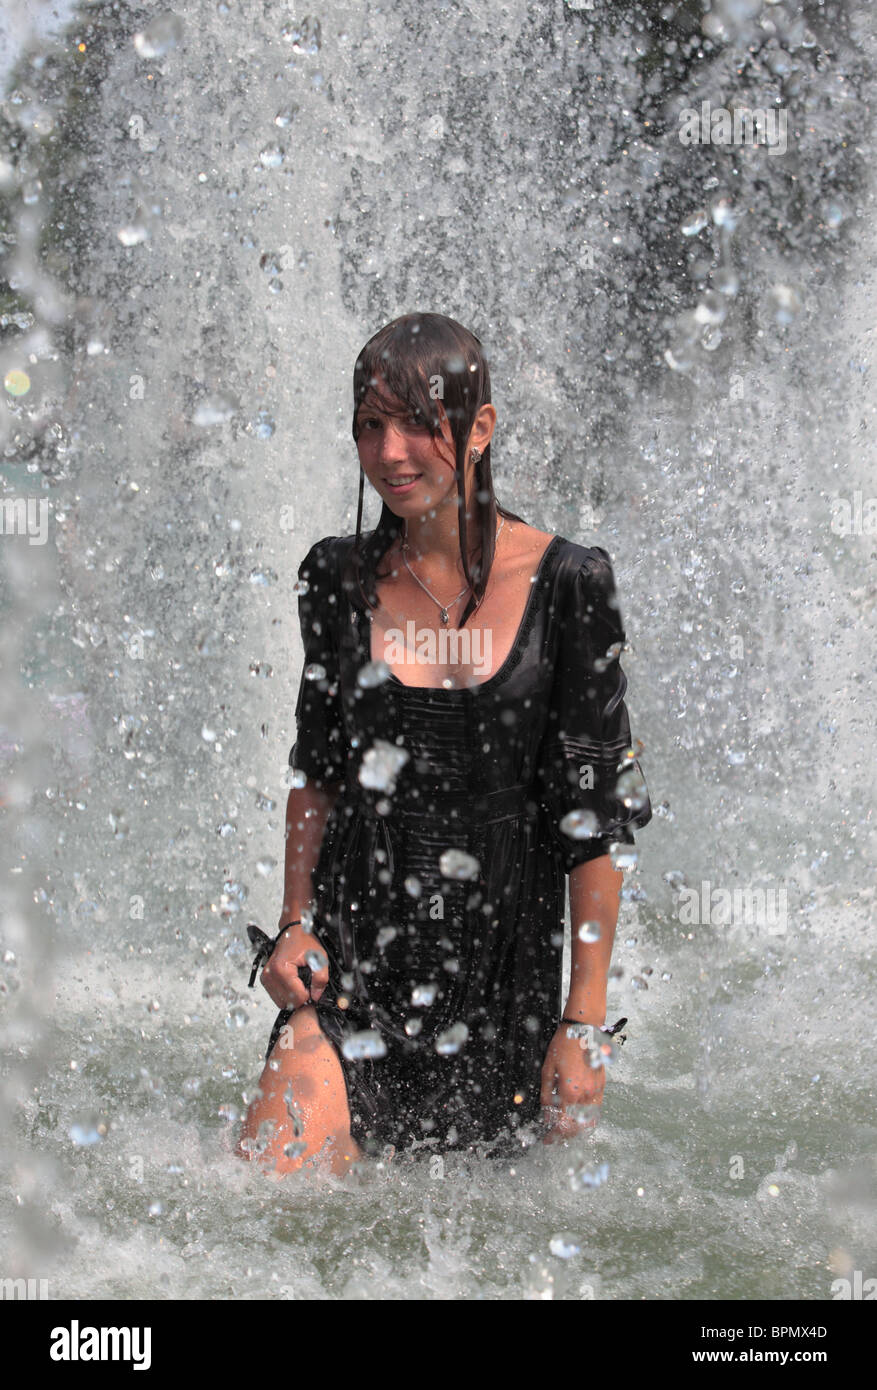 Pretty girl refreshing in water jets, Russian hot summer 2010 Stock Photo